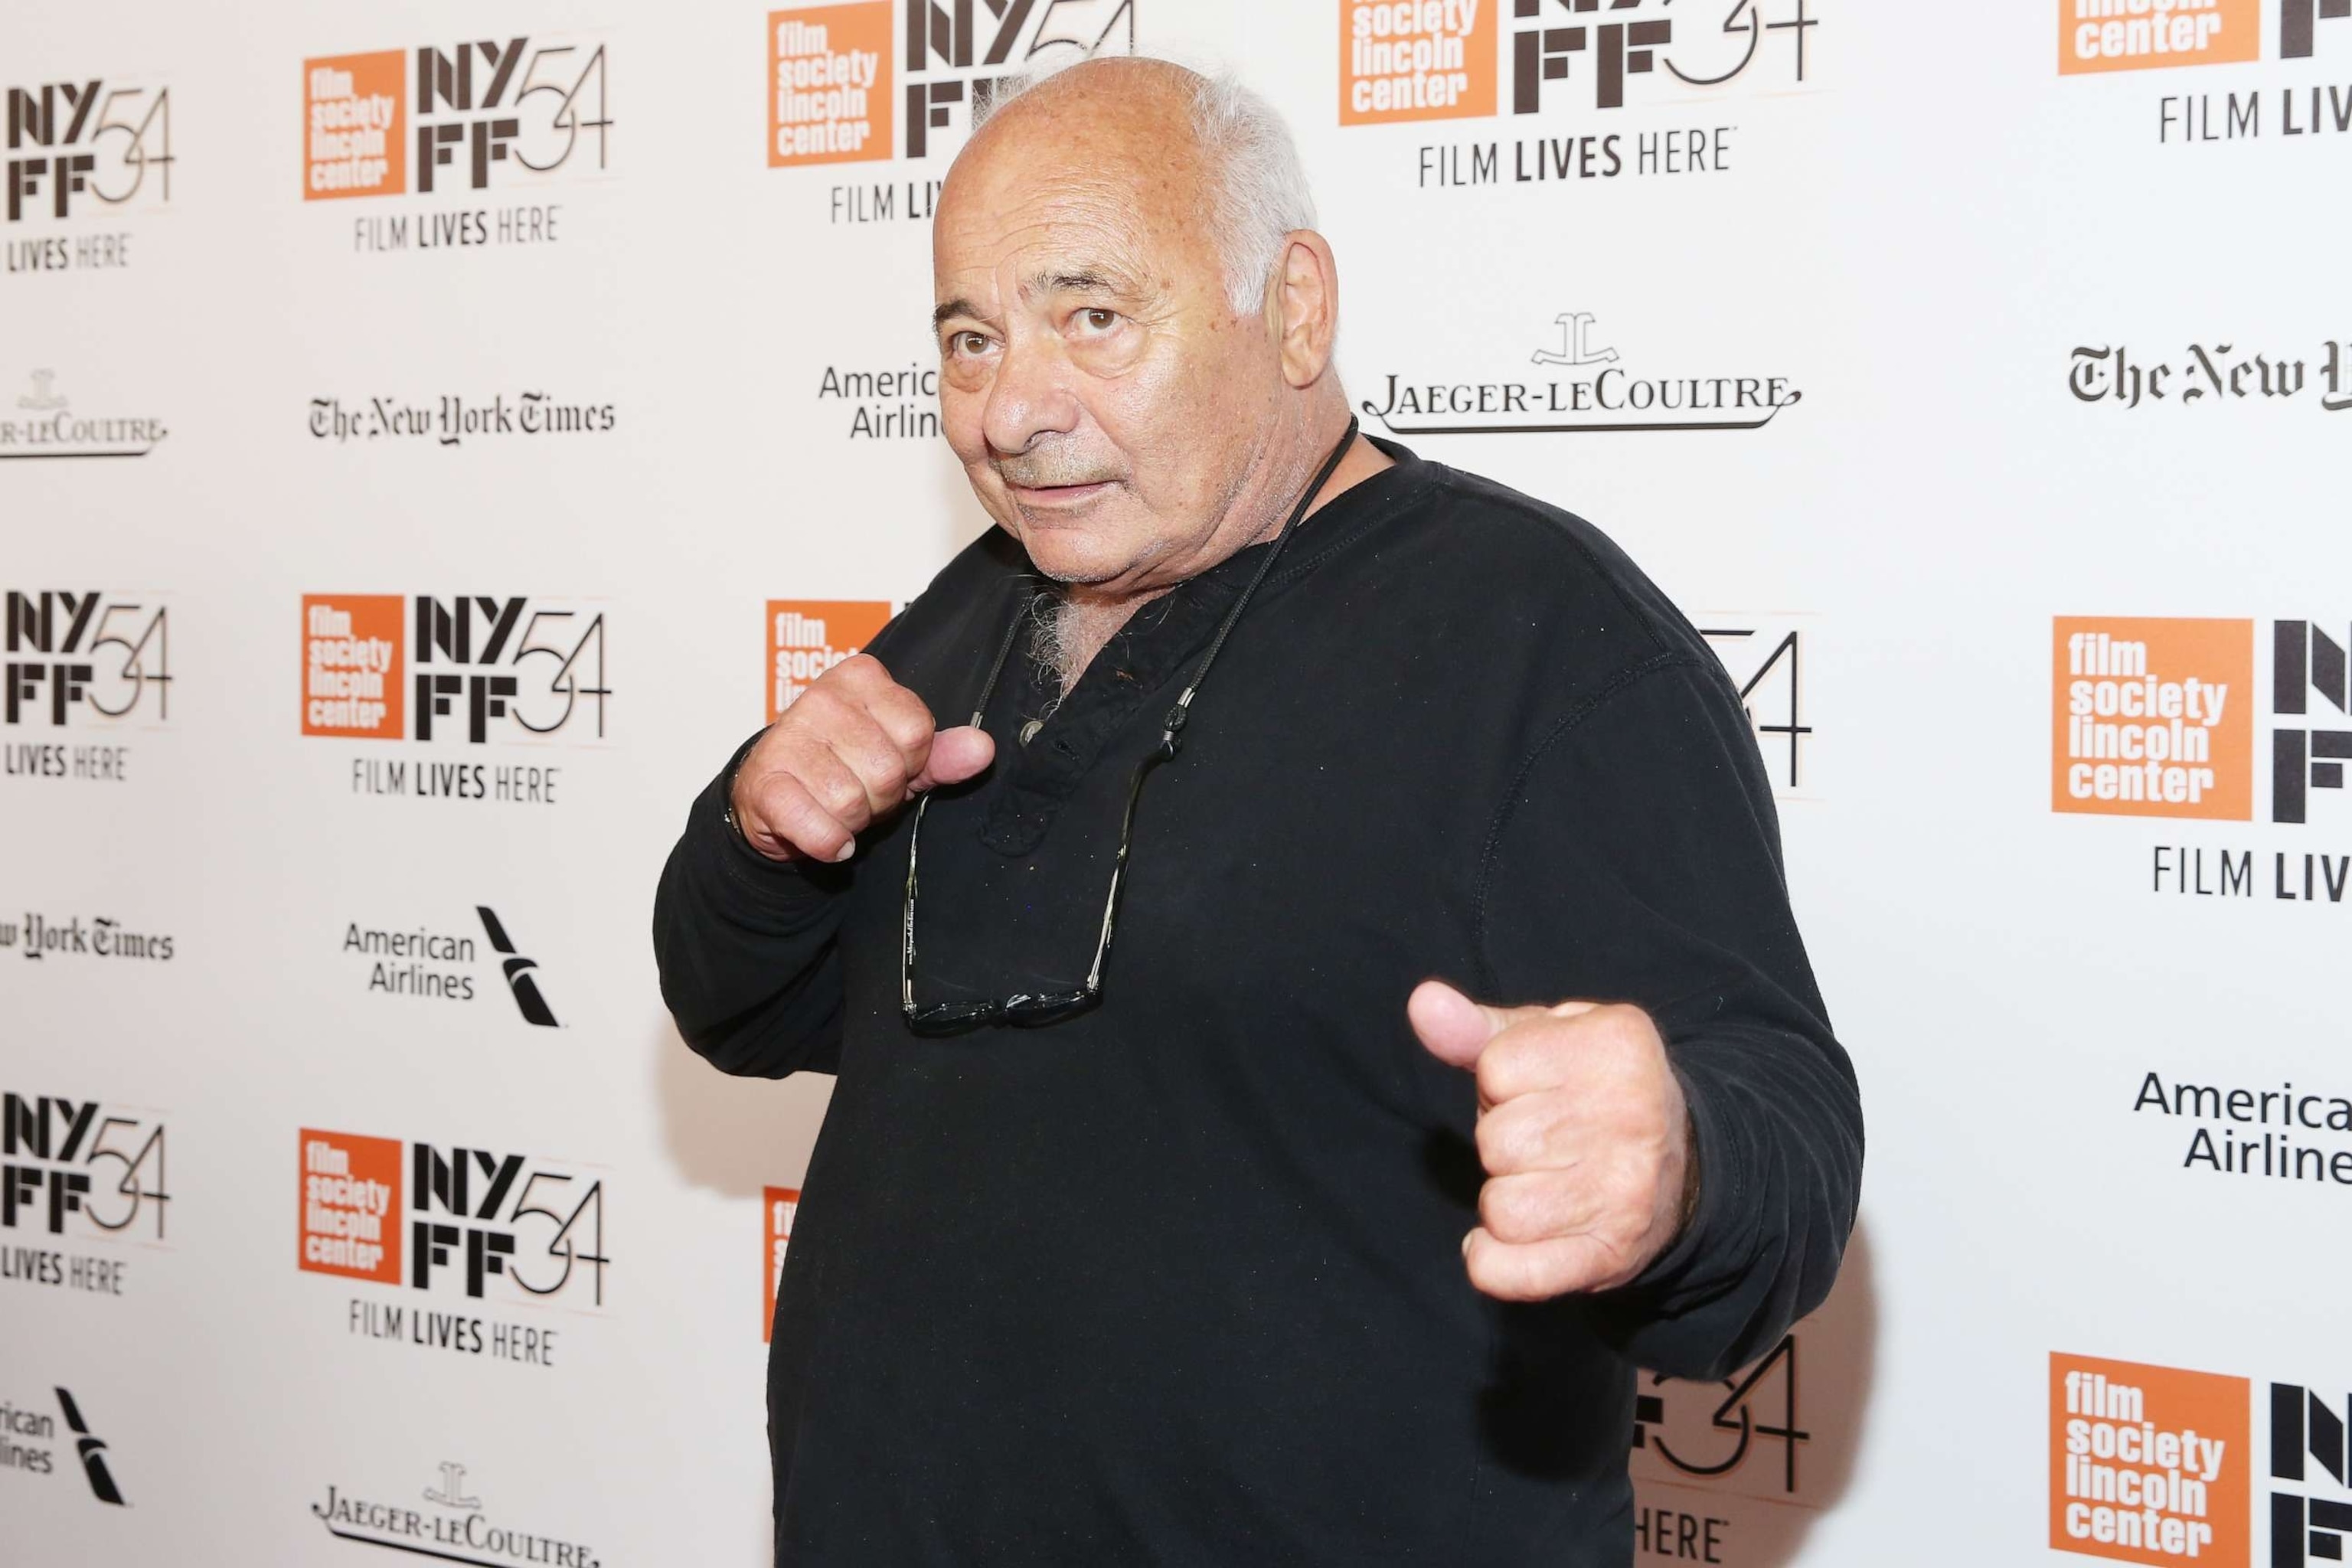 PHOTO: Actor Burt Young attends the premiere of "20th Century Women" at the 54th New York Film Festival on October 8, 2016 in New York City. (Photo by Mireya Acierto/Getty Images)